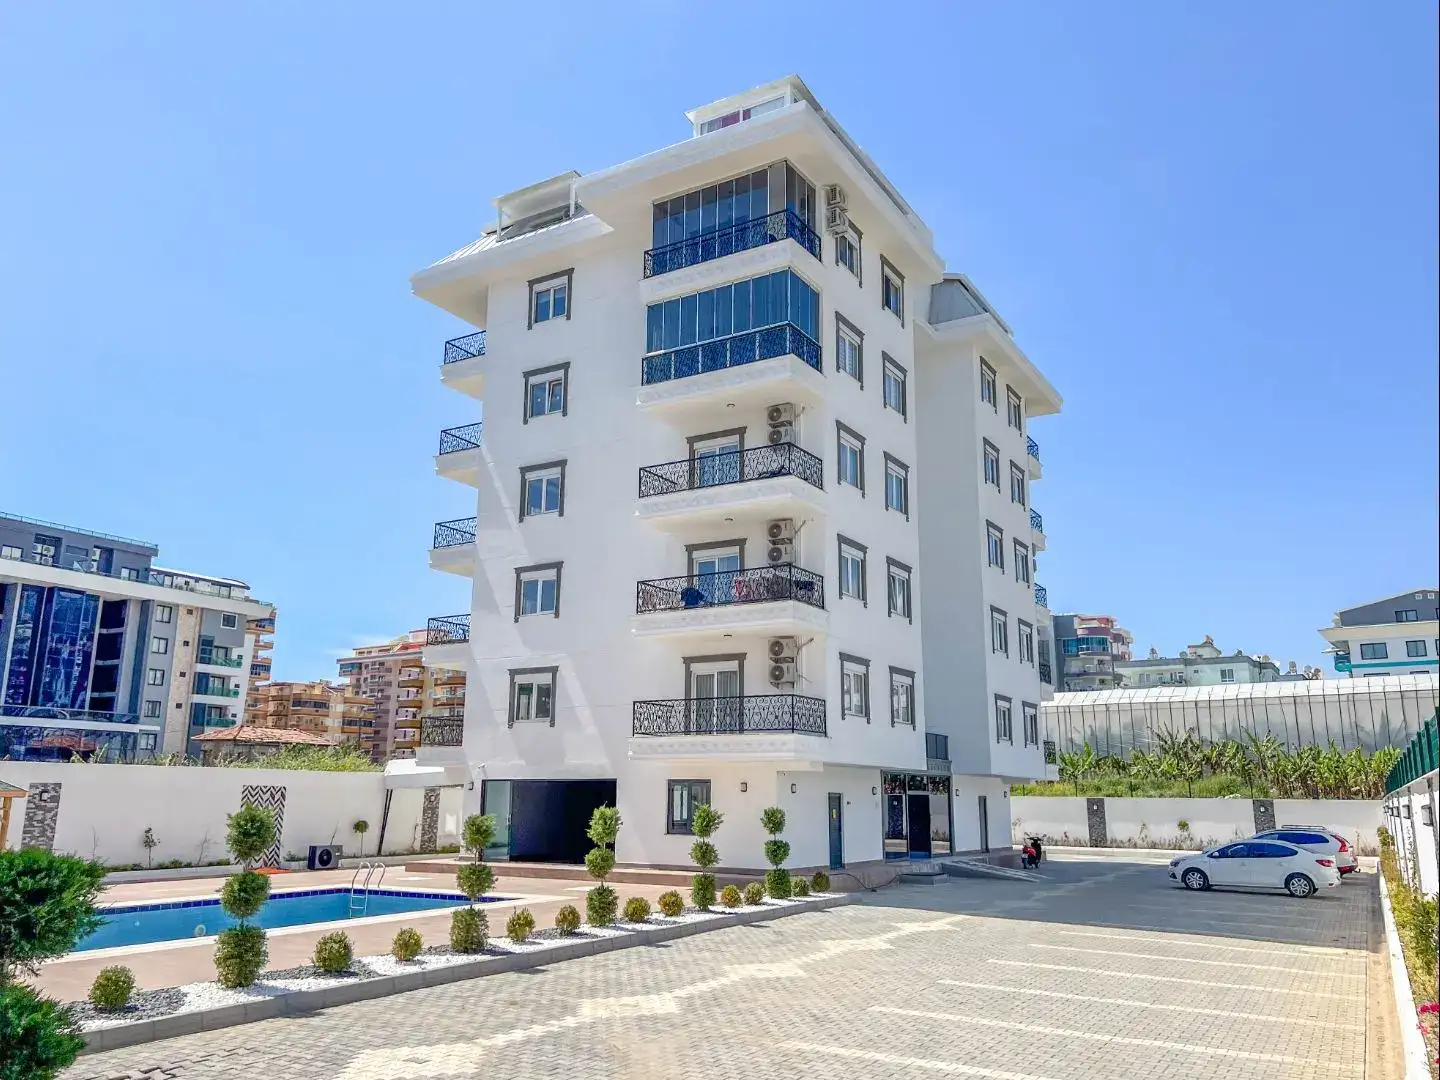 NEWLY BUİLT APARTMENT FOR SALE İN KARGICAK-ALANYA